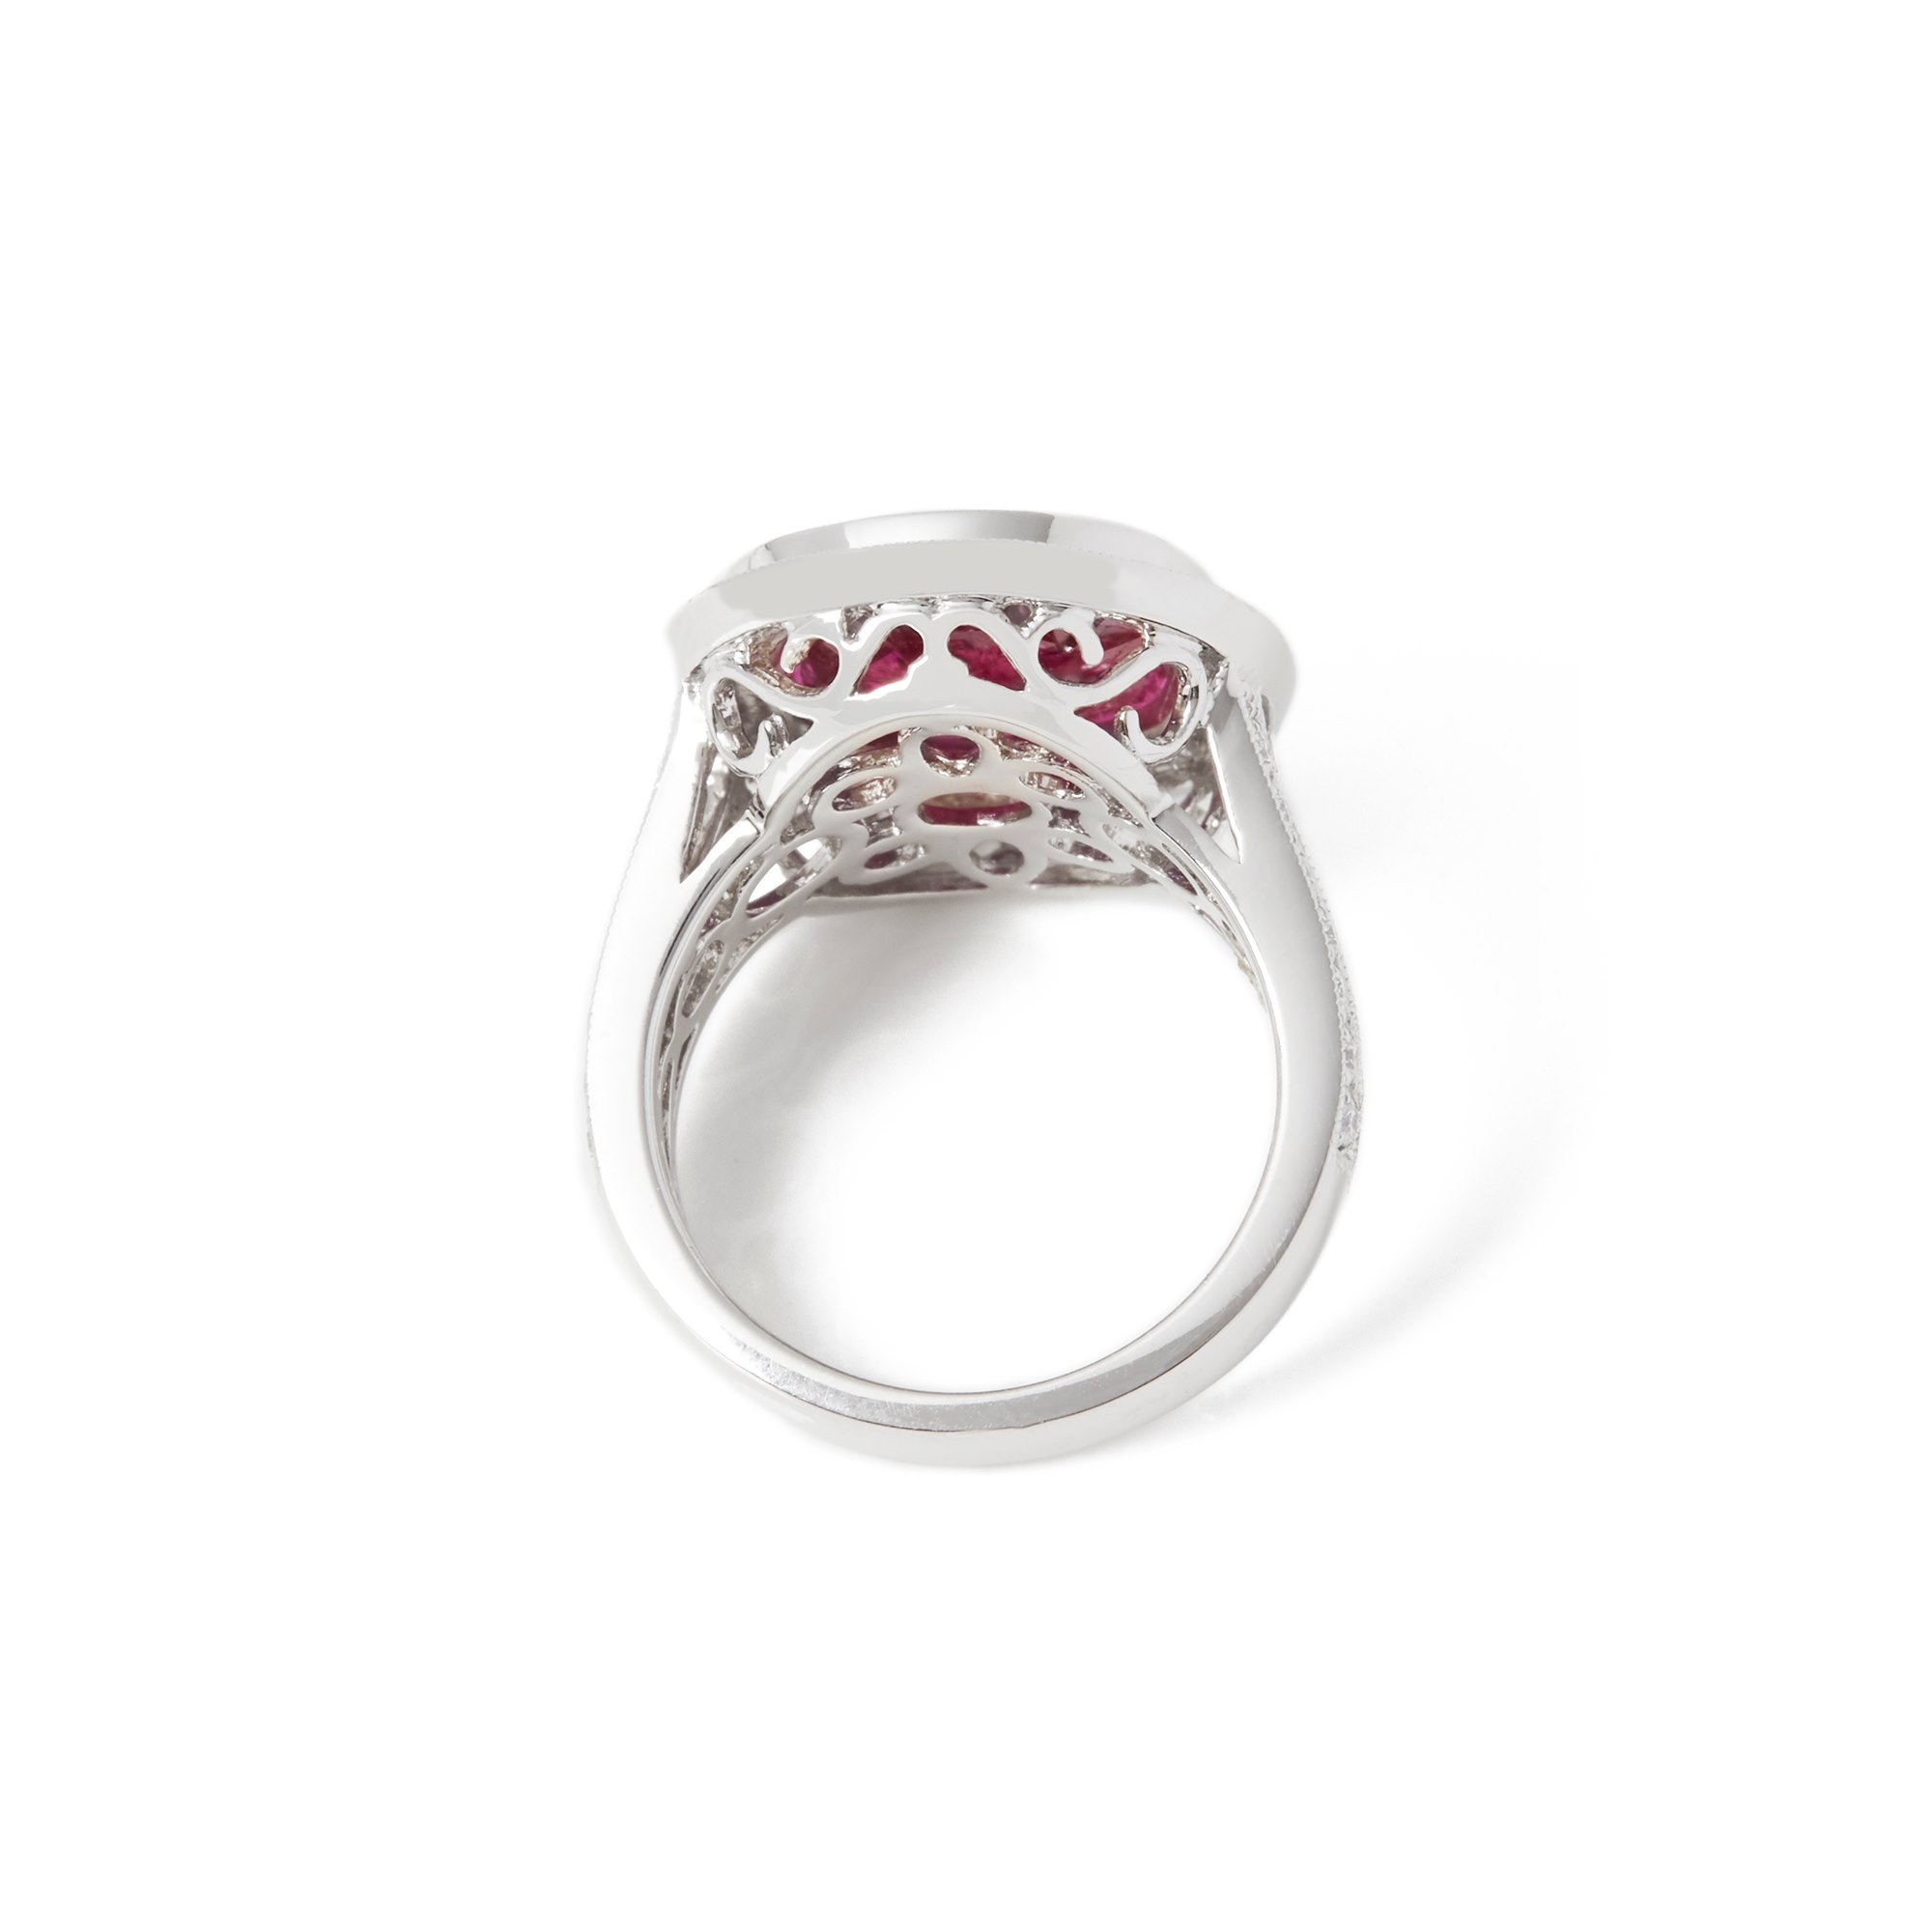 David Jerome Certified 7.1ct Oval Cut Ruby and Diamond 18ct Gold Ring